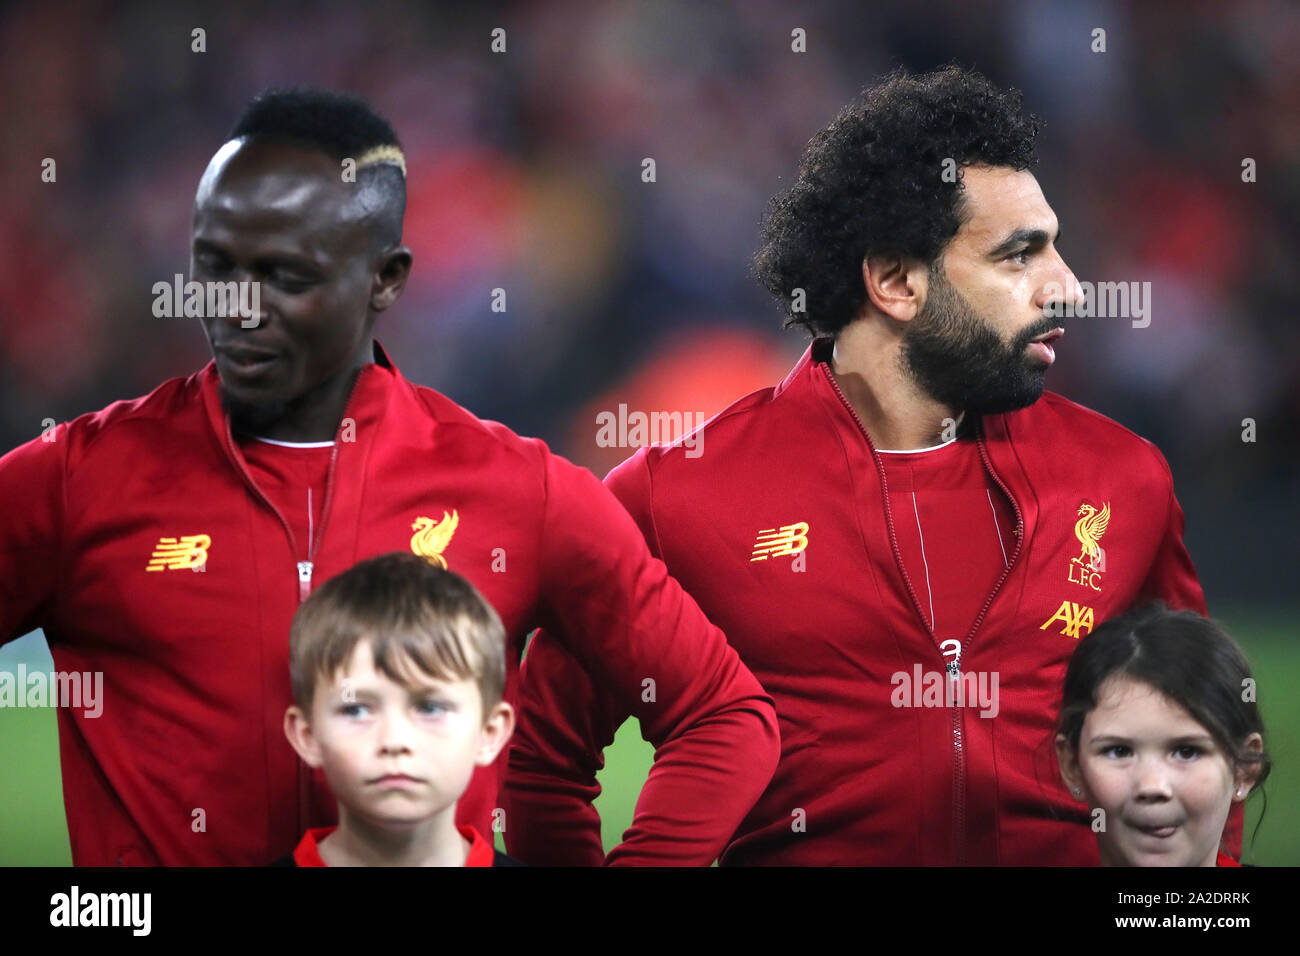 Liverpool's Sadio Mane (left) and Mohamed Salah during the UEFA Champions League Group E match at Anfield, Liverpool. Stock Photo